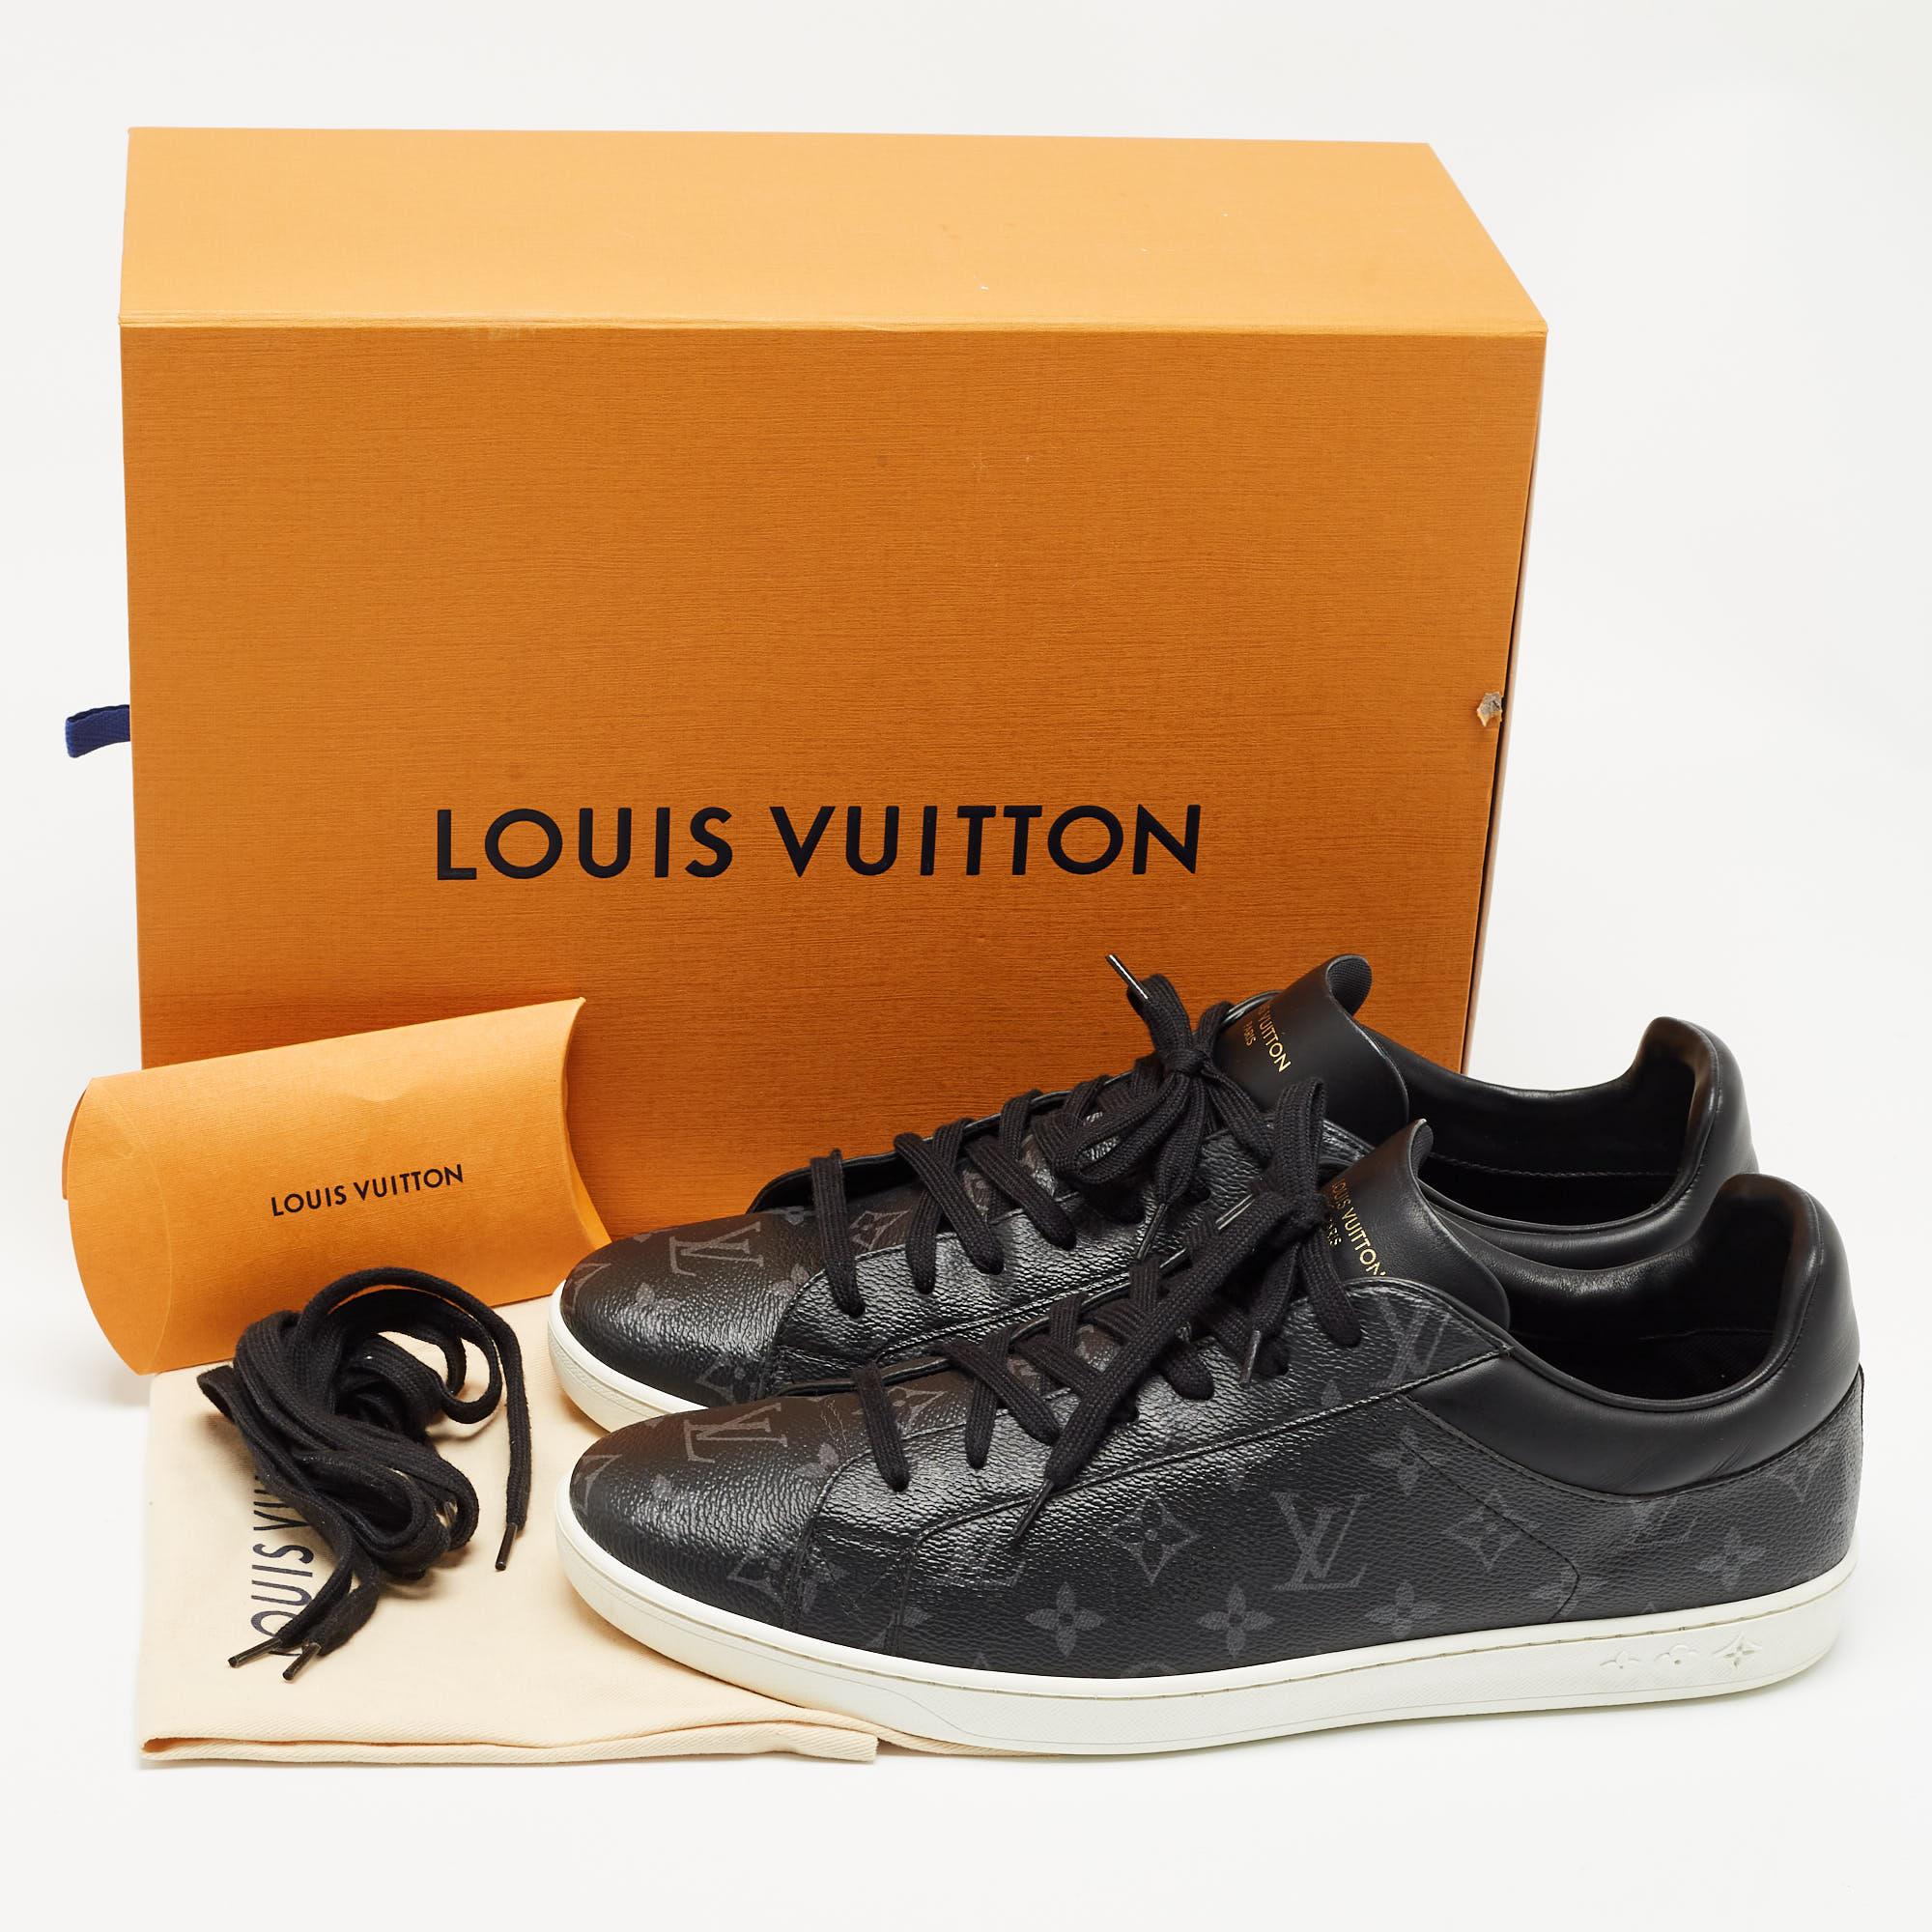 Louis Vuitton Monogram Eclipse Luxembourg Sneakers Size 46 For Sale 3